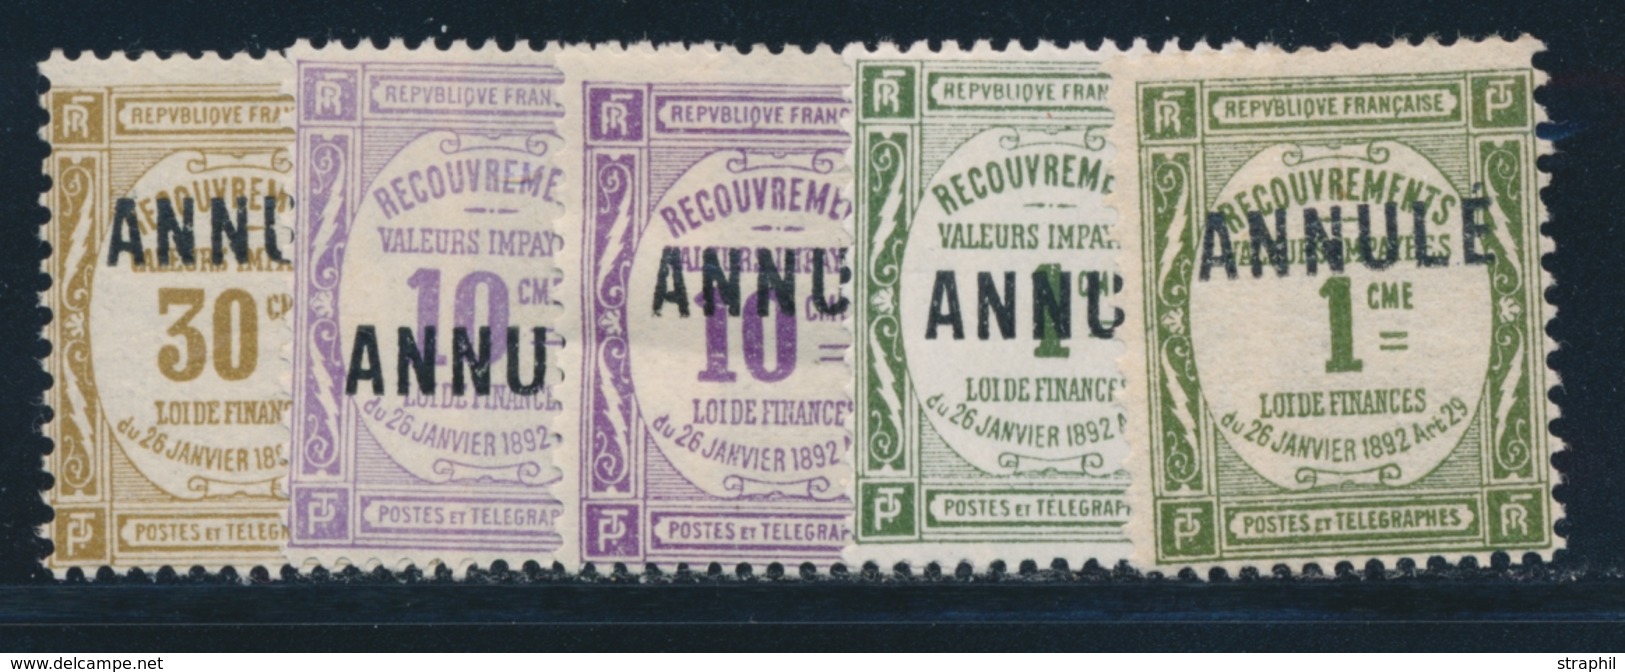 * TIMBRES TAXE N°43/44 X2, 46 - Le N°46 ** - ANNULE - TB - Cours D'Instruction